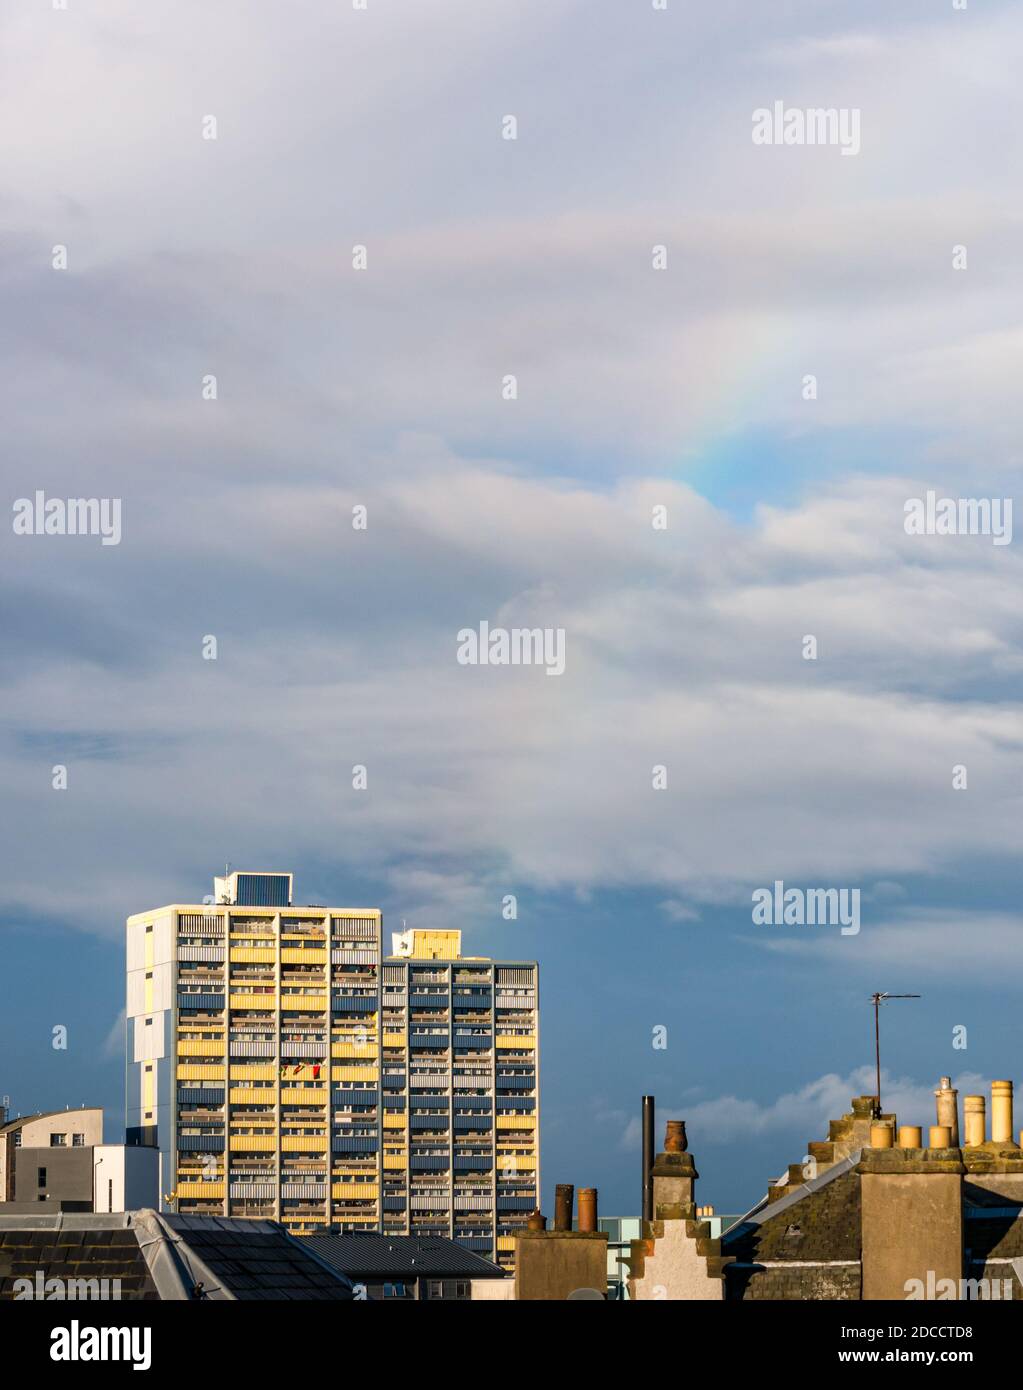 Council tower block of flats towering over rooftops with rainbow in sky, Leith, Edinburgh, Scotland, UK Stock Photo